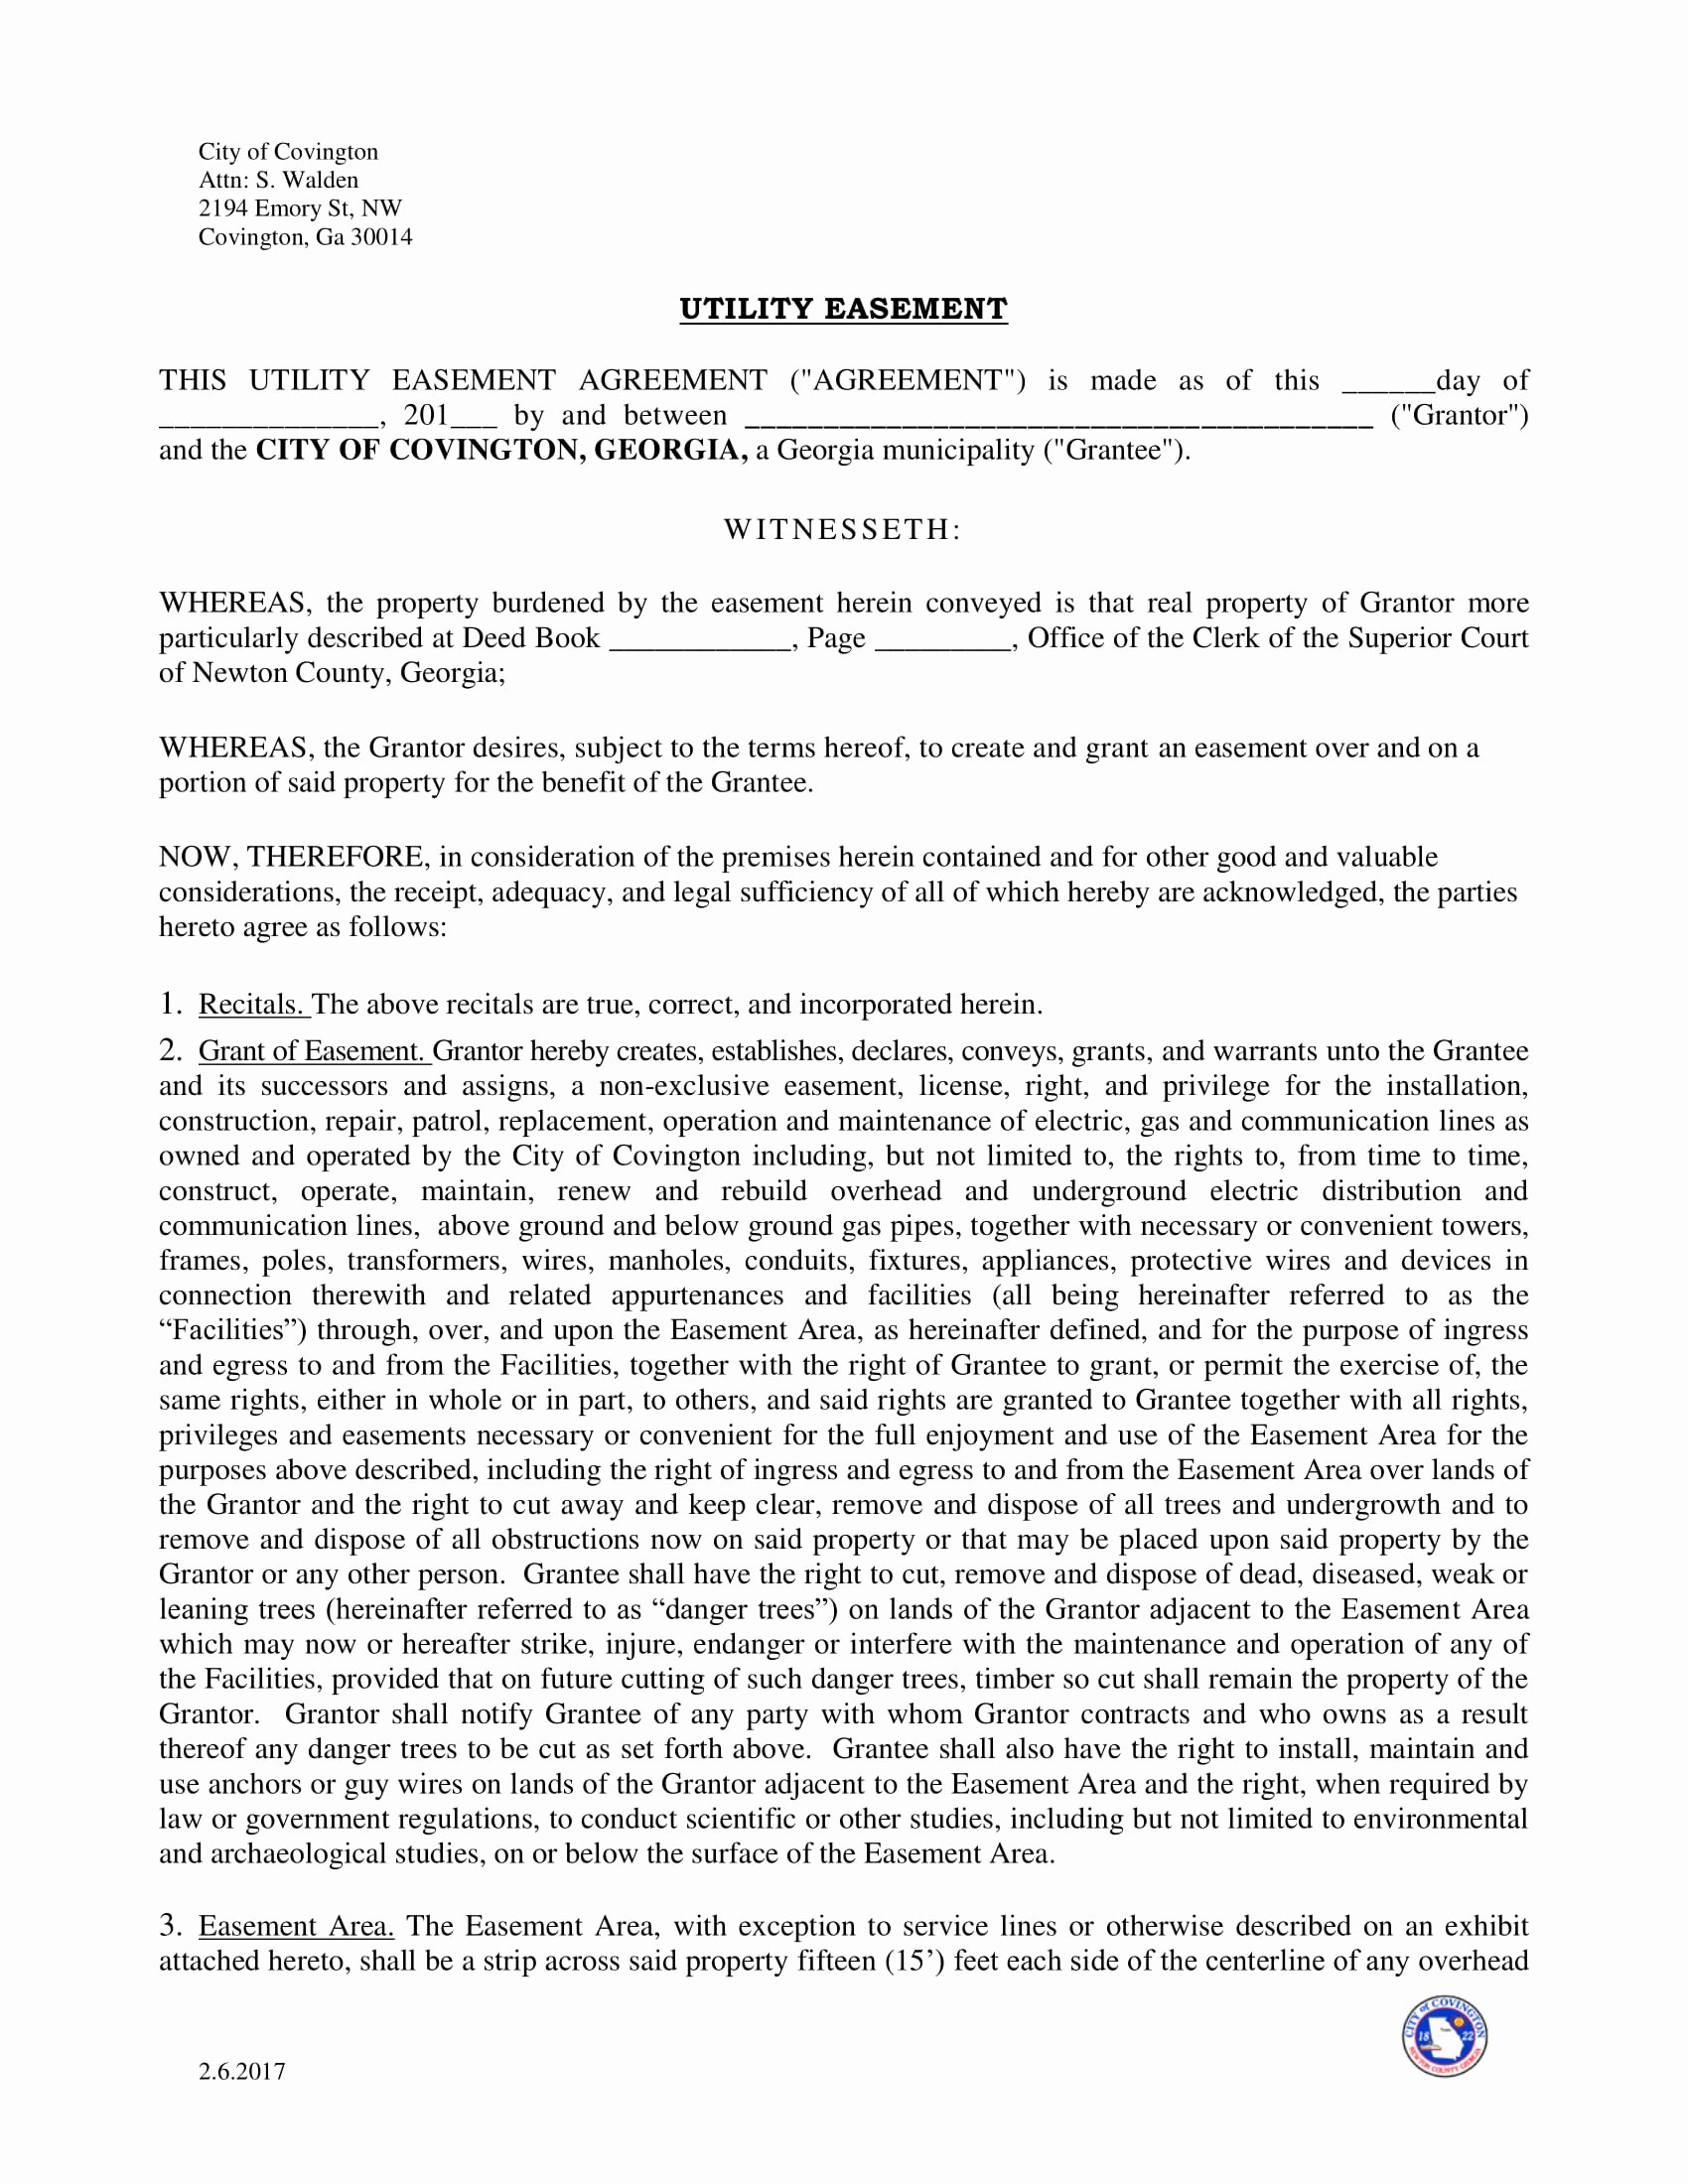 Sample Utility Easement Agreement Best Of 10 Easement Agreement Contract forms Pdf